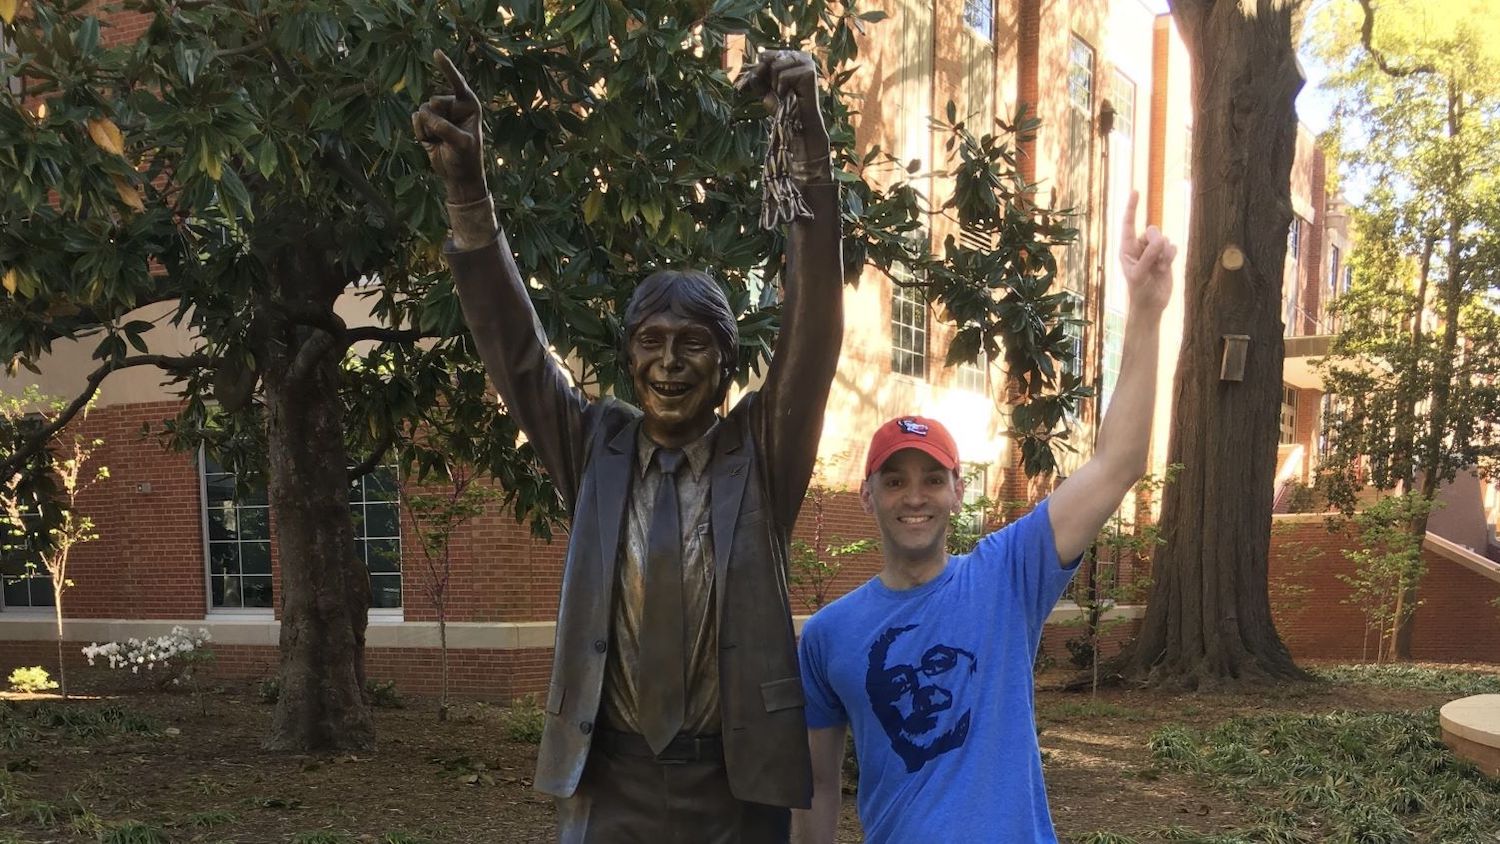 Lope “Max” Diaz II standing next to a statue of Jim Valvano.